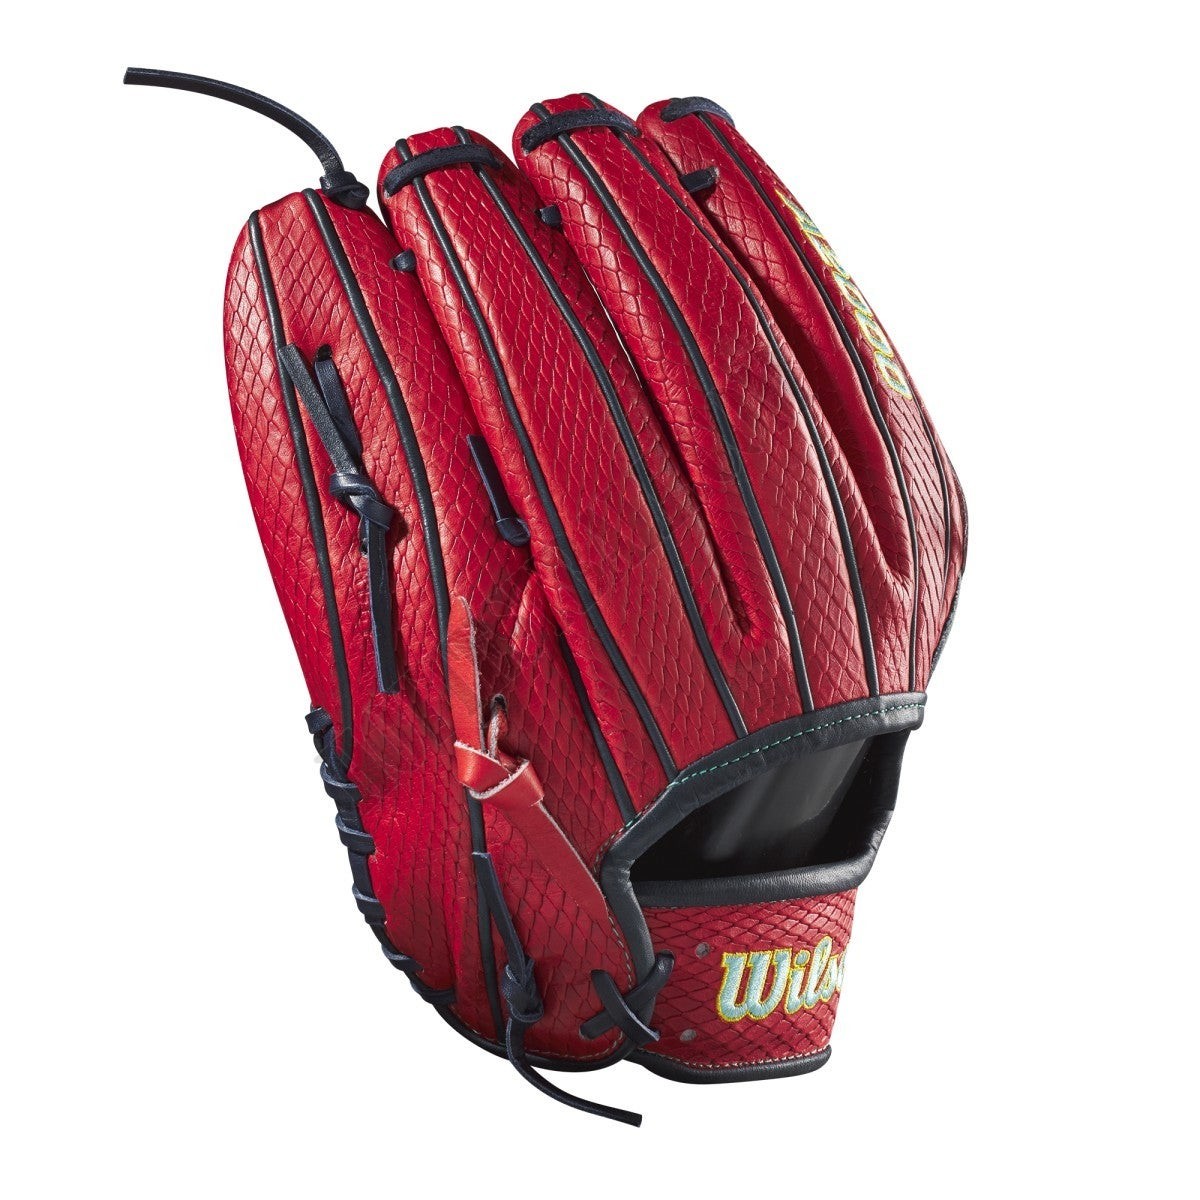 2021 A2000 B2 12" Mike Clevinger Game Model Pitcher's Baseball Glove ● Wilson Promotions - -4